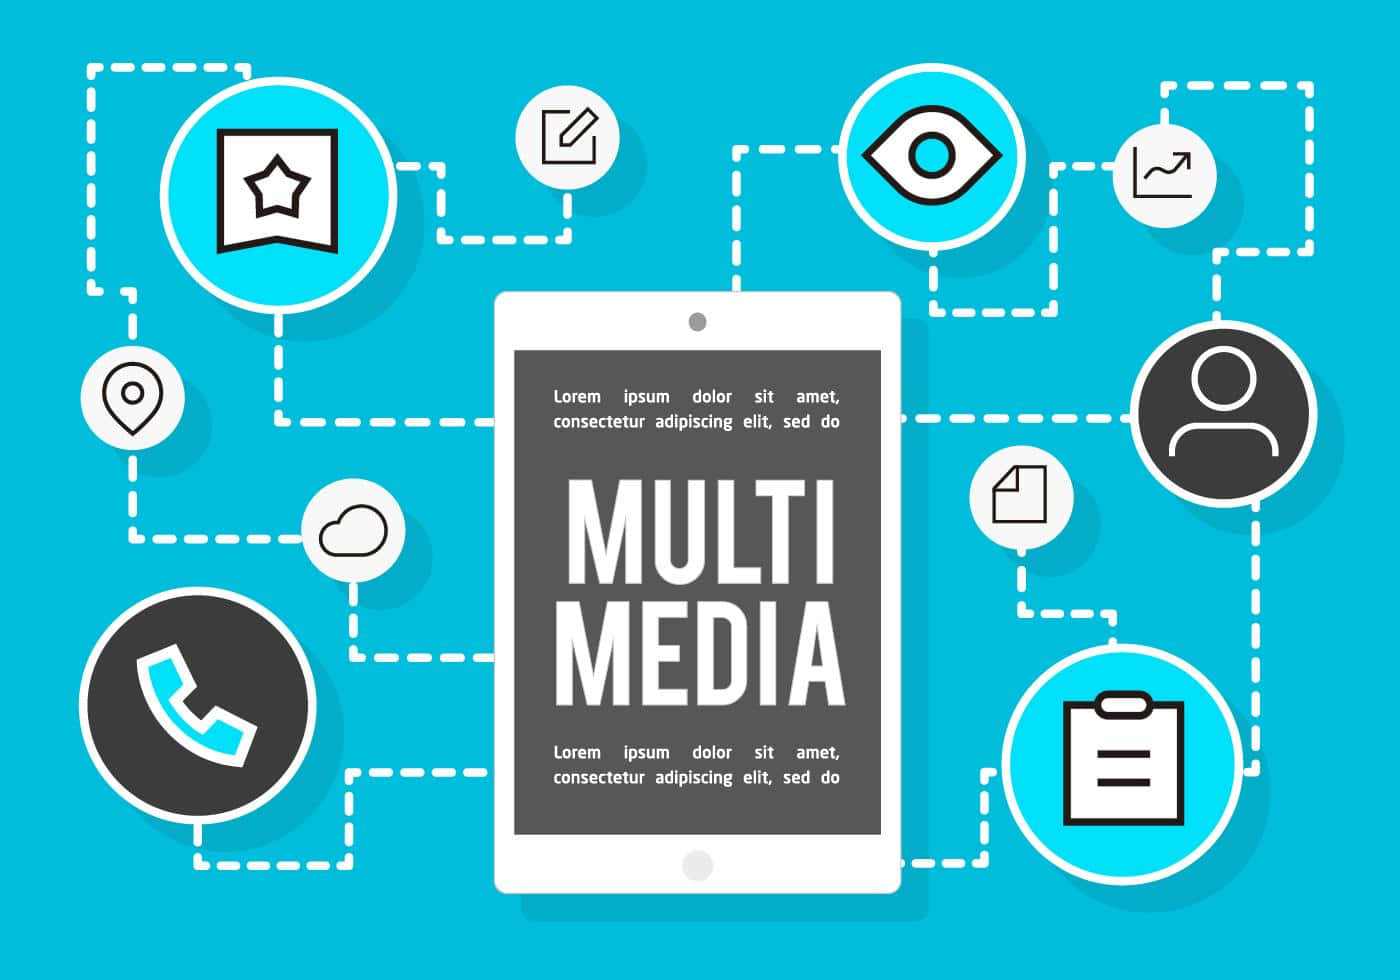 Multimedia is the new way of communicating and sharing experiences Wallpaper